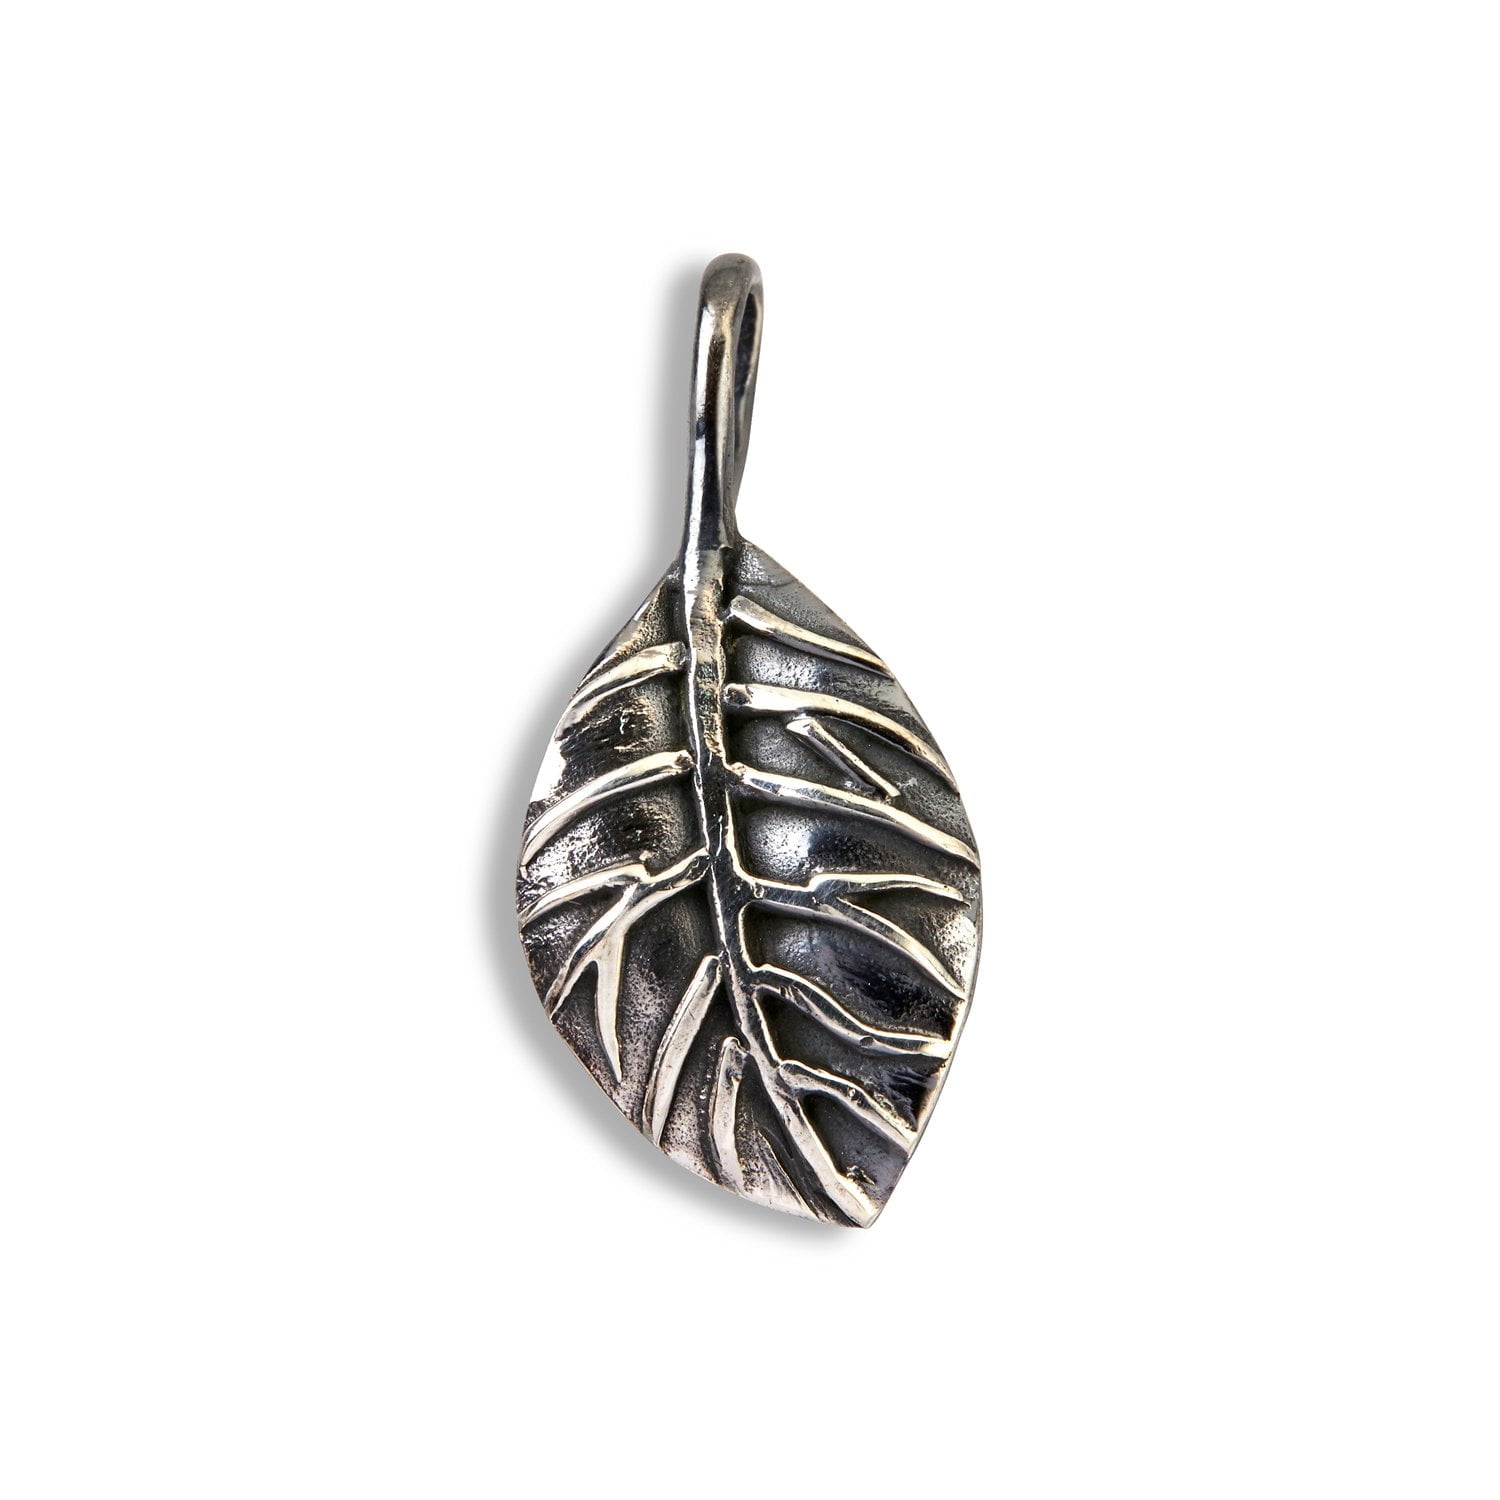 Small Beech Leaf Jewellery Pendant Of Silver